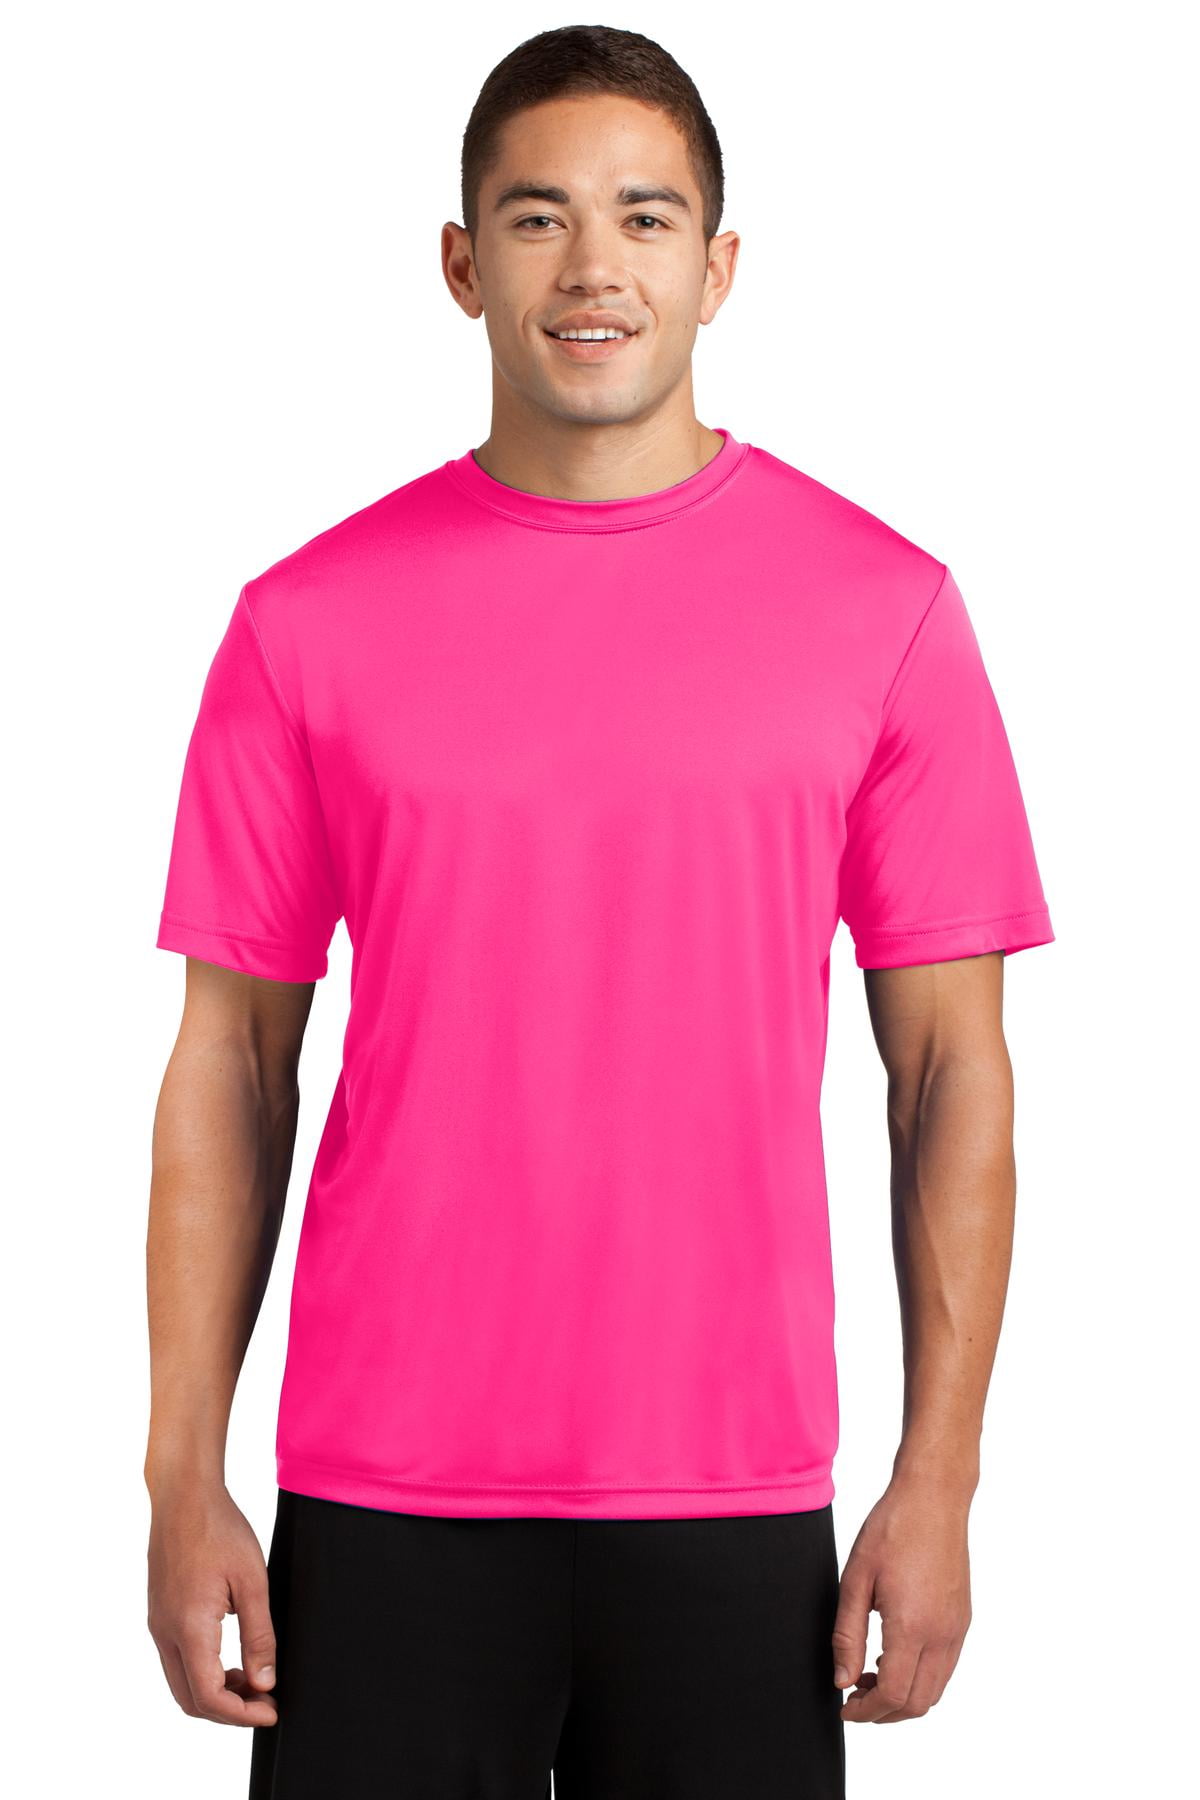 Sport-Tek Posicharge Competitor Tee St350 - Neon Pink - L